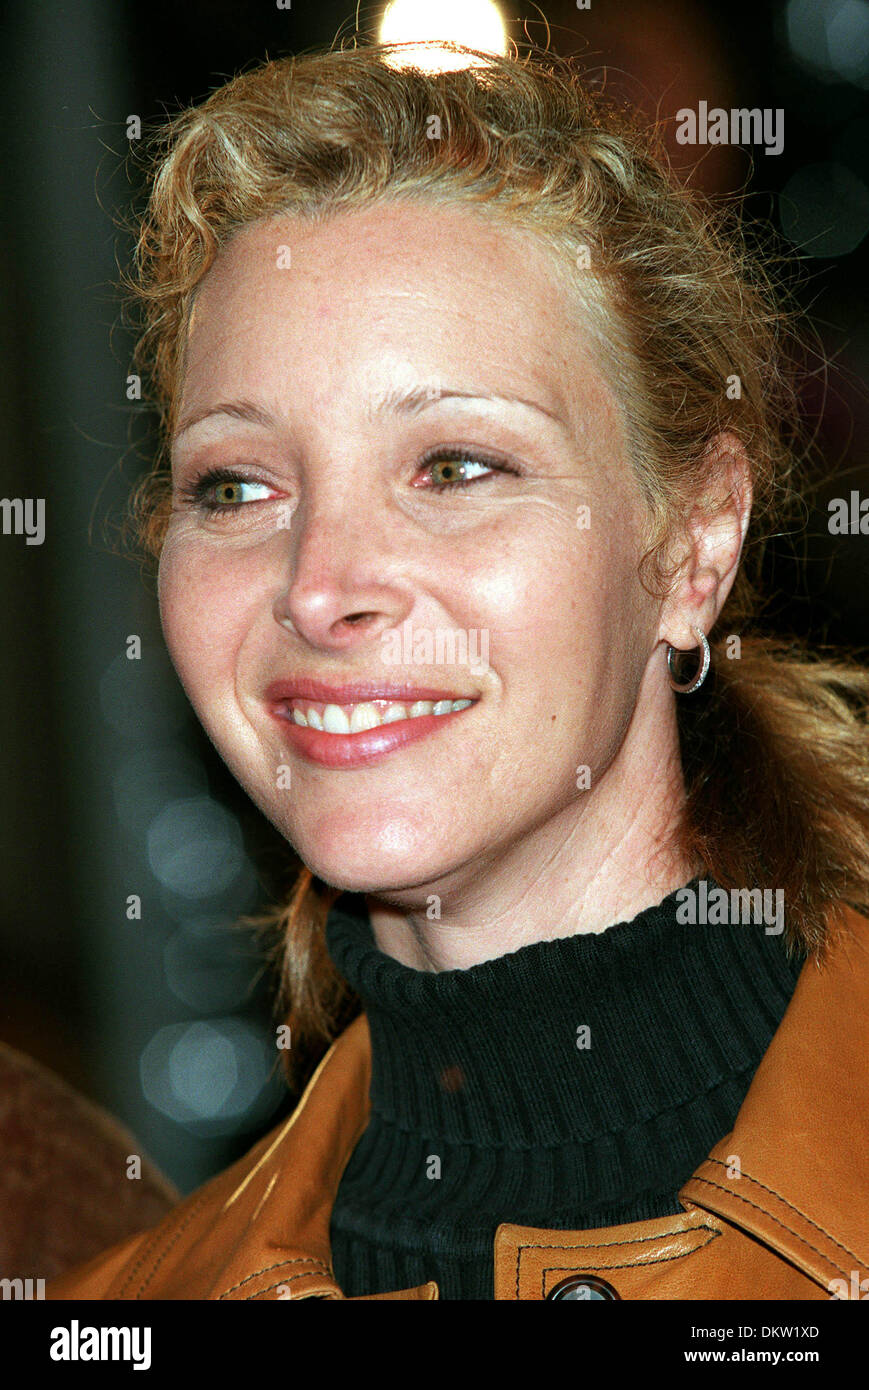 LISA KUDROW ACTRICE.''Amis''.WESTWOOD, LA, USA.23/02/2001.BF63A18 Banque D'Images